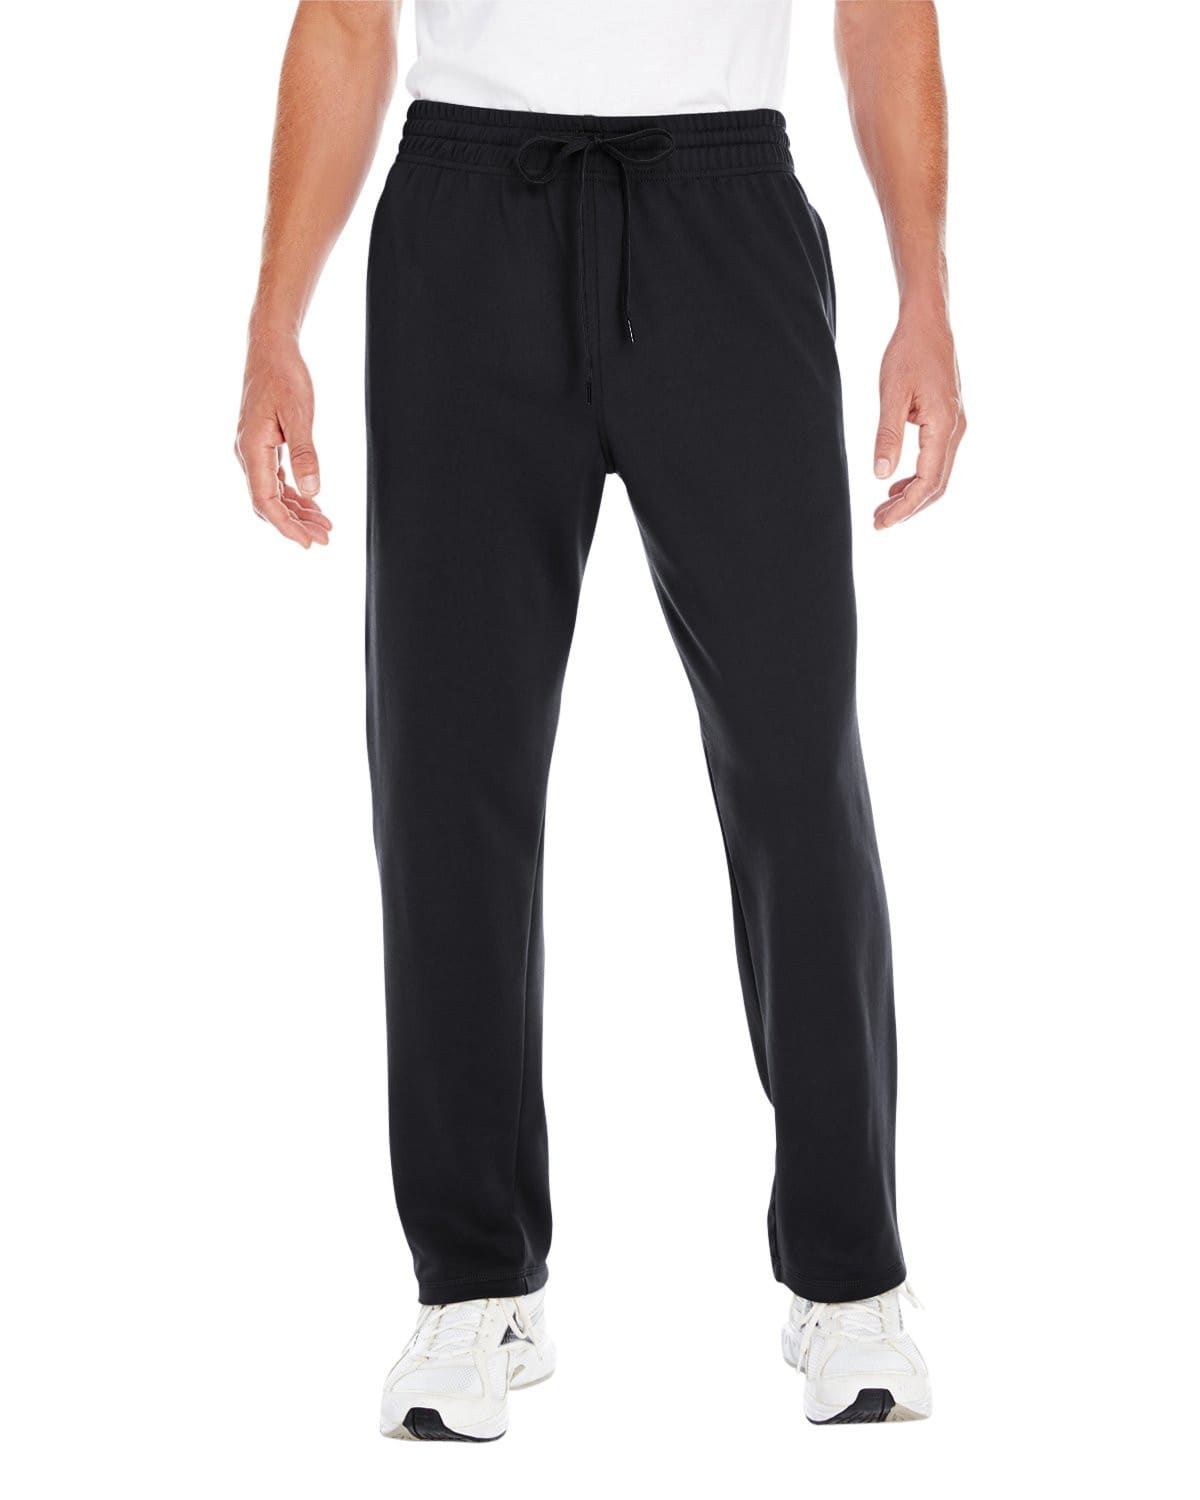 g994-adult-performance-7-oz-tech-open-bottom-sweatpants-withpockets-Small-BLACK-Oasispromos